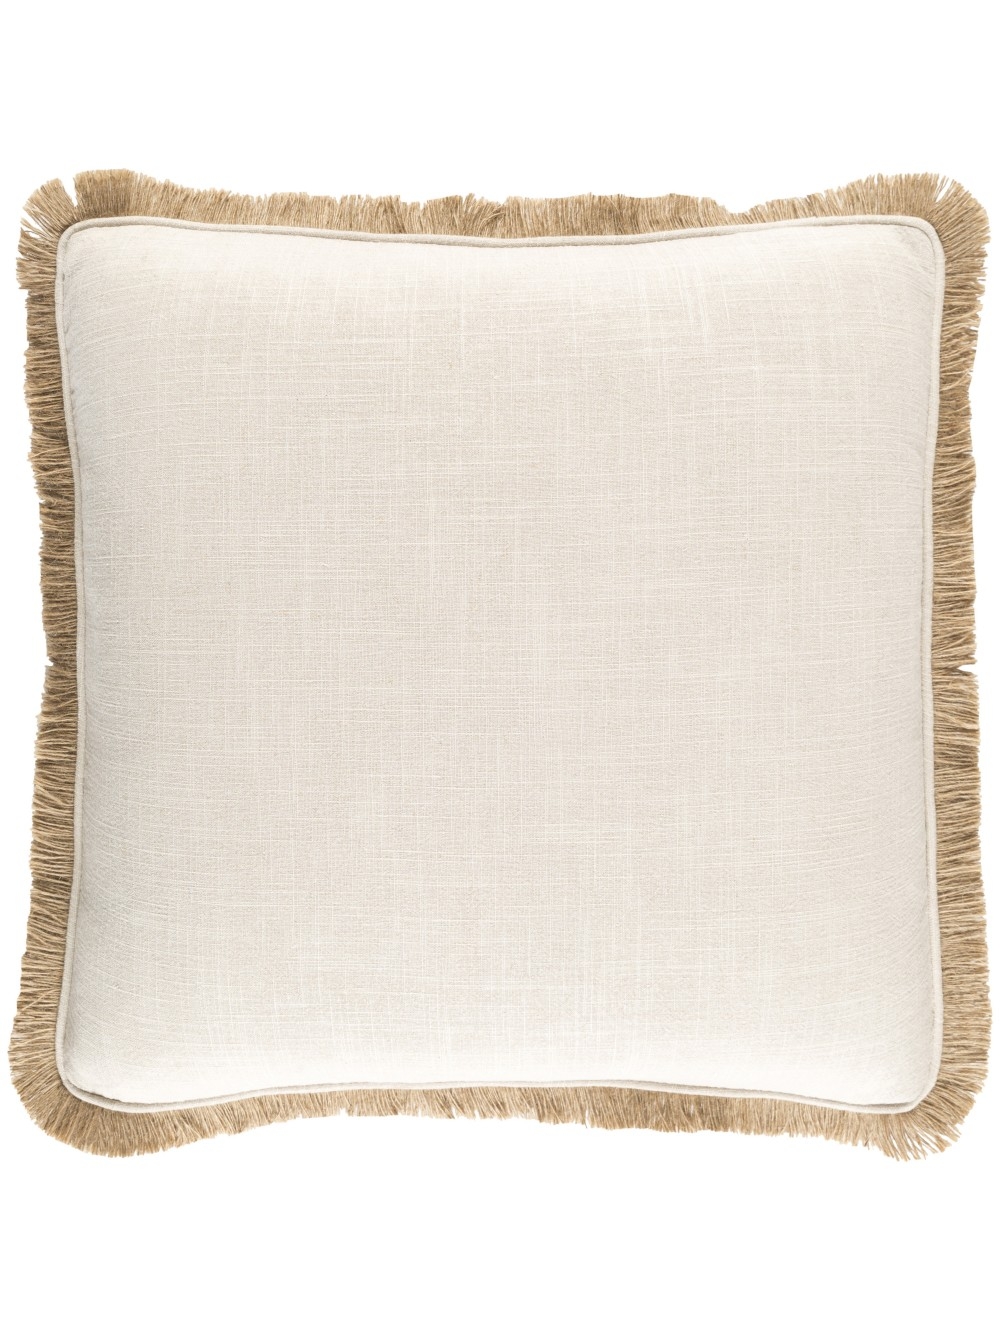 GUIDA PILLOW - 18x18 - Poly filled - Image 0